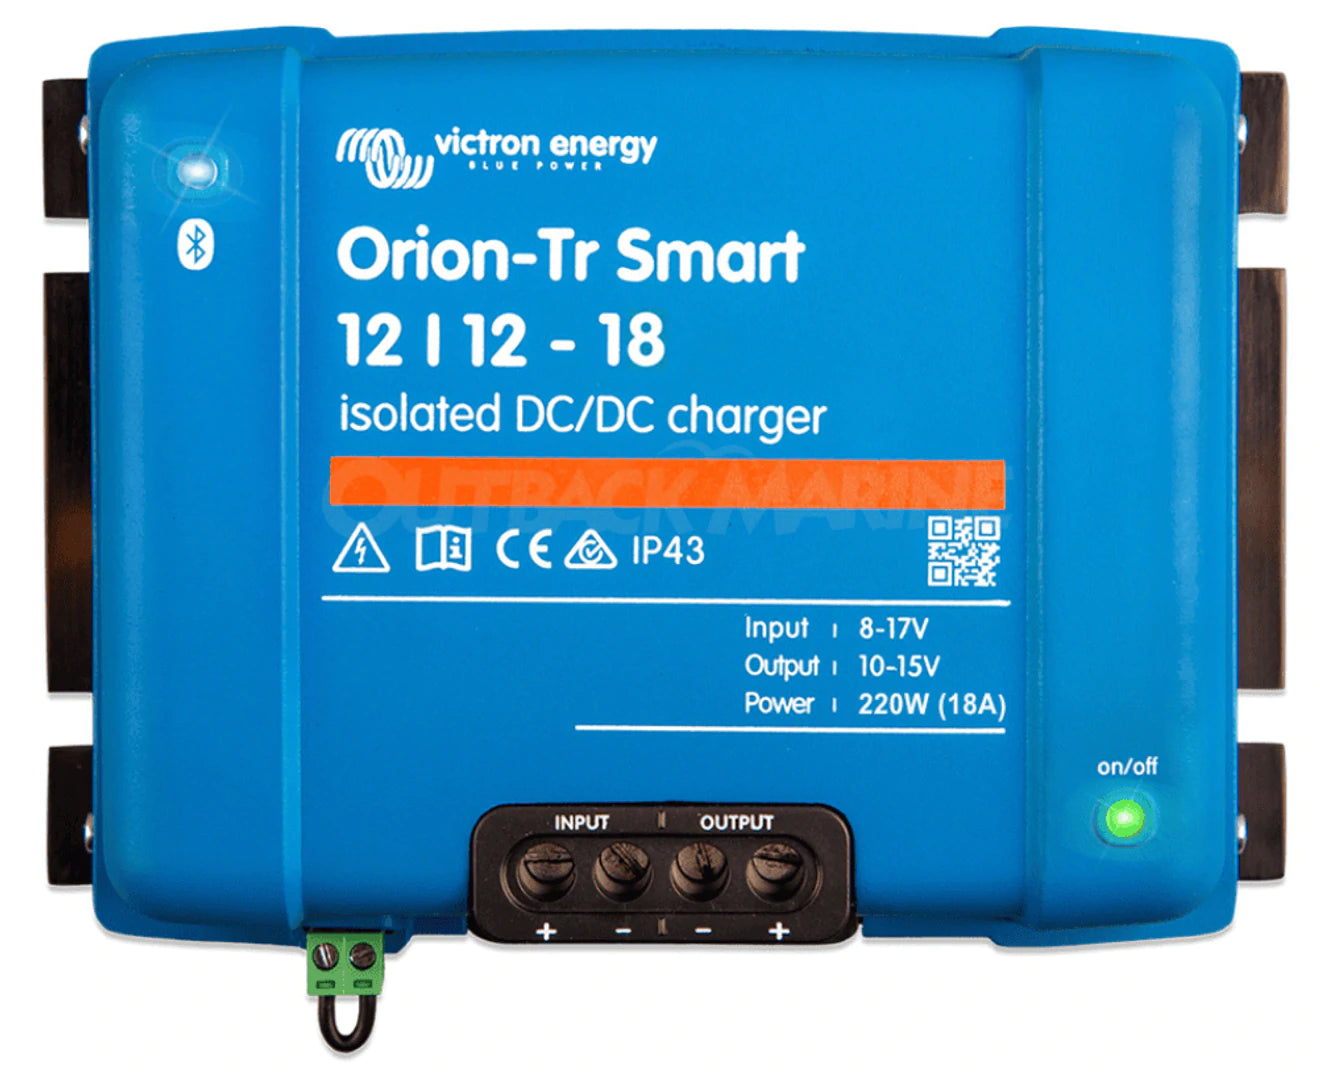  Isolated Orion-Tr Smart 12/12-18A (220W) *WITH FREE DIAGRAM*